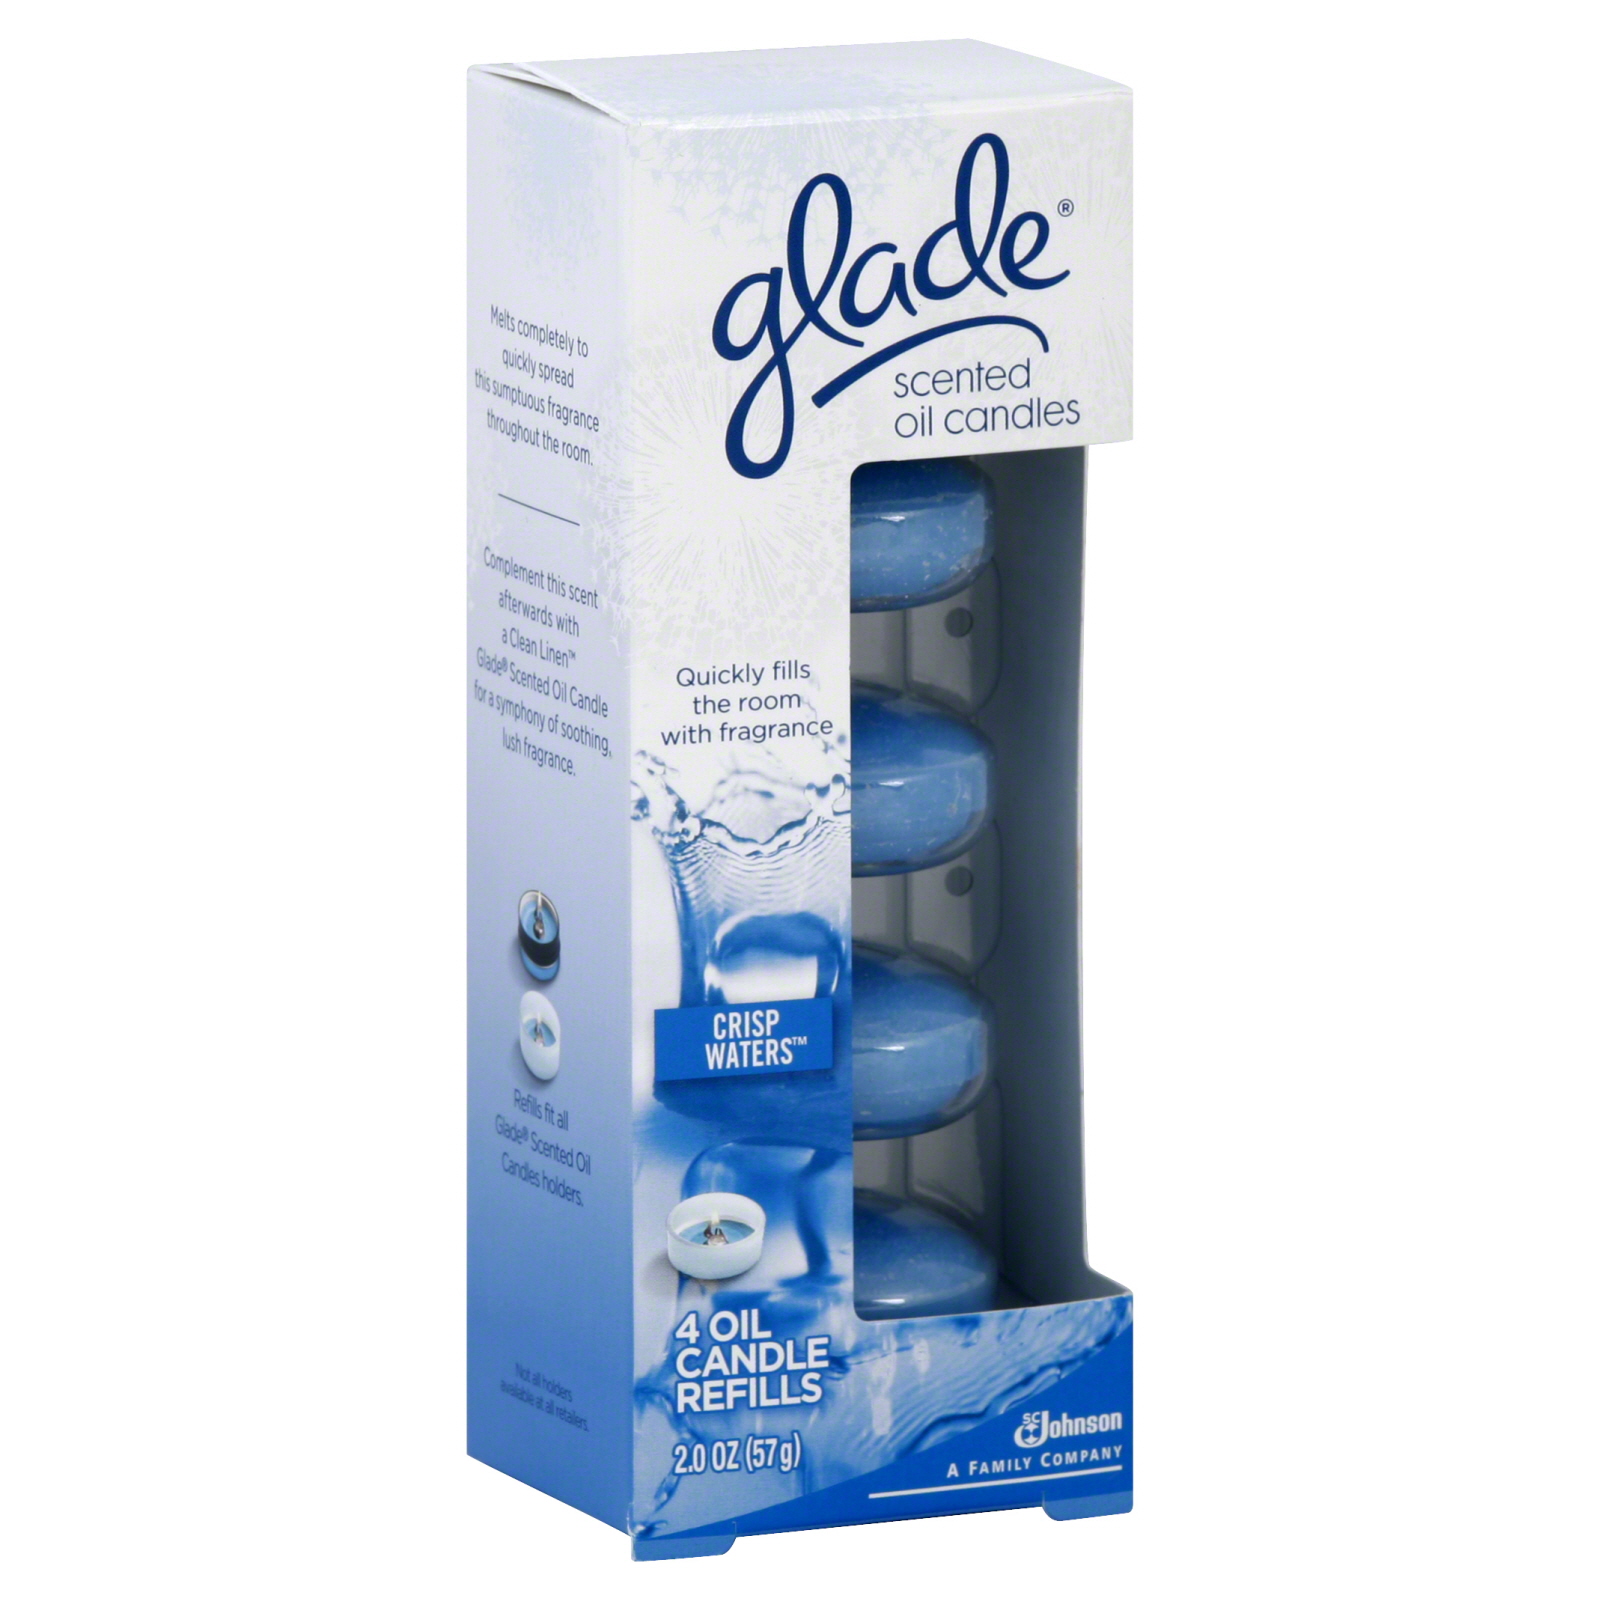 Glade Scented Oil Candles, Crisp Waters, 4 refills [2 oz (57 g)]